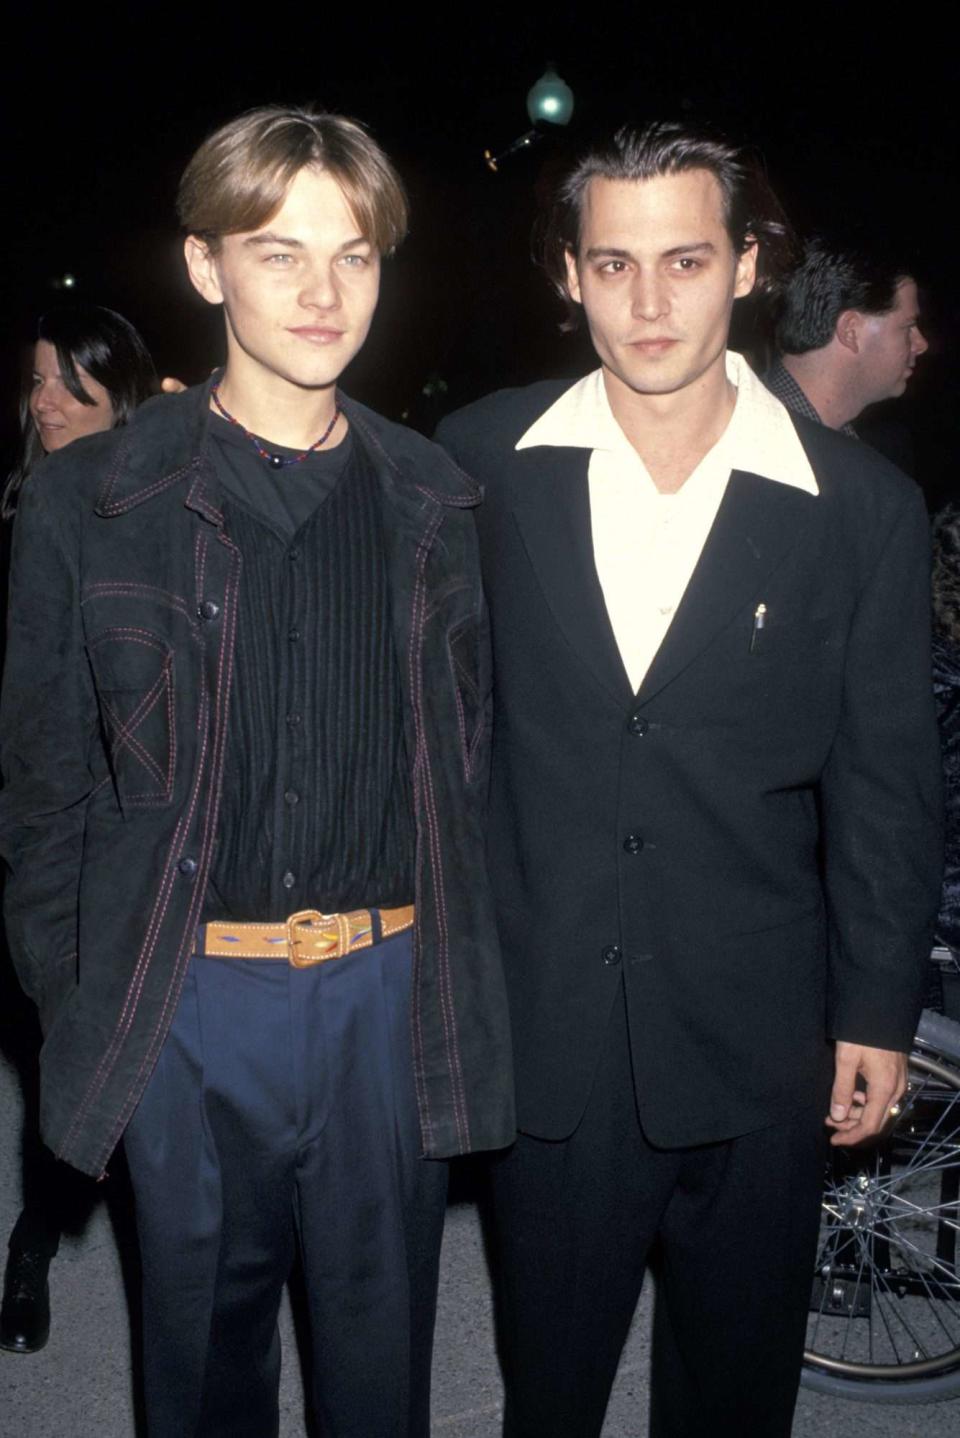 <p>Pictured here with <em>What's Eating Gilbert Grape</em> costar Johnny Depp in 1993, DiCaprio attended an event for their film — which garnered the young actor critical acclaim and his first Oscar nod.</p>